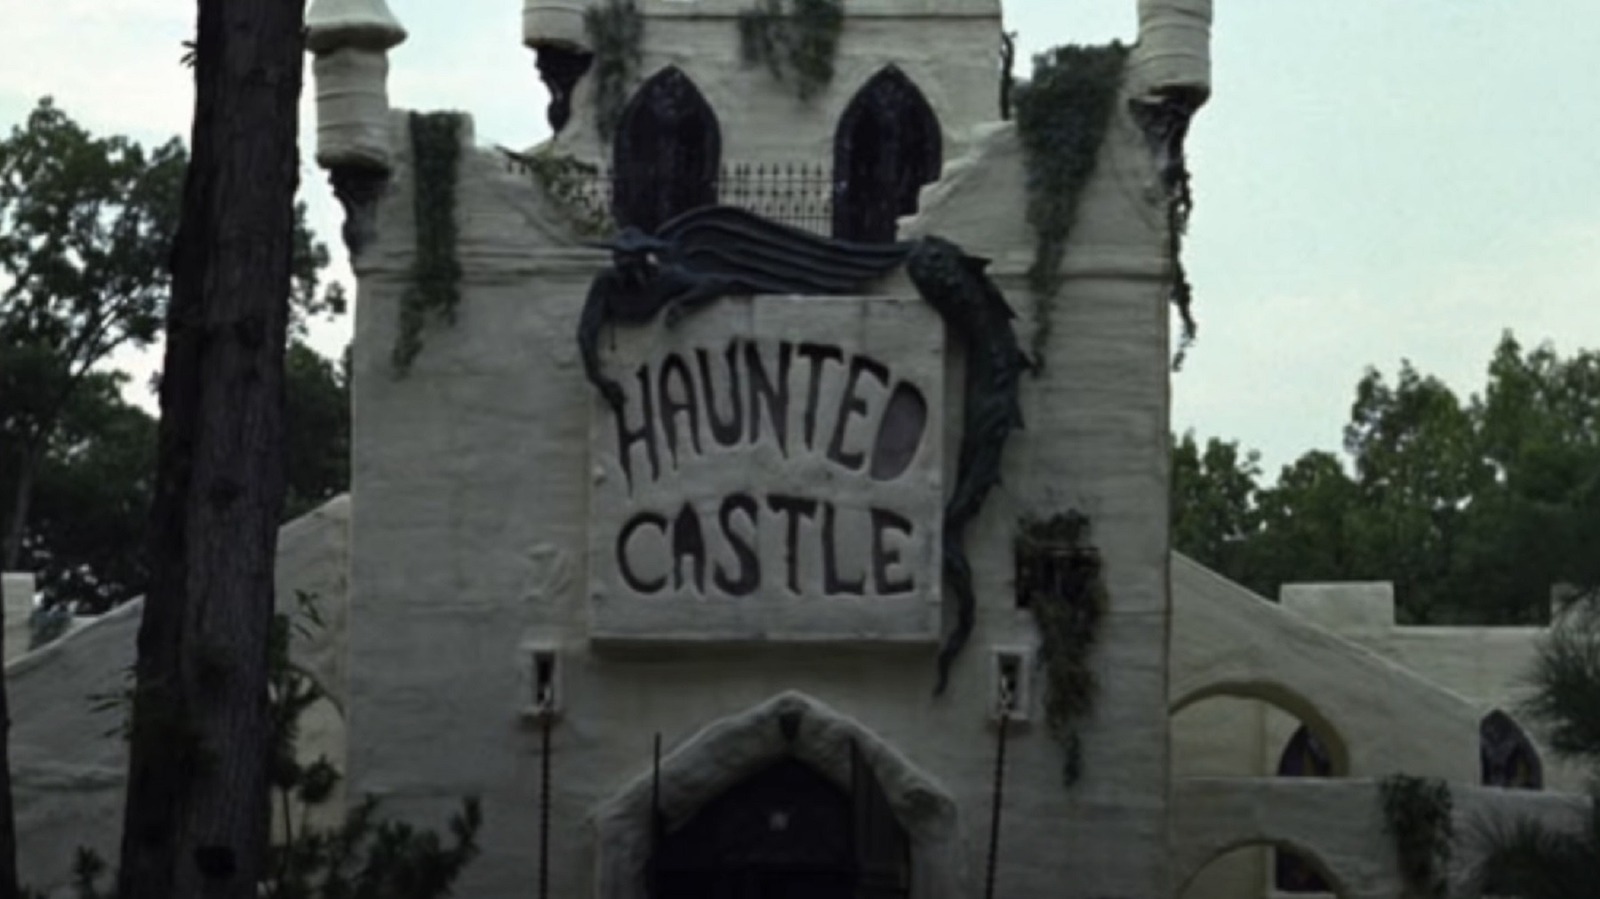 six flags haunted castle disaster victims